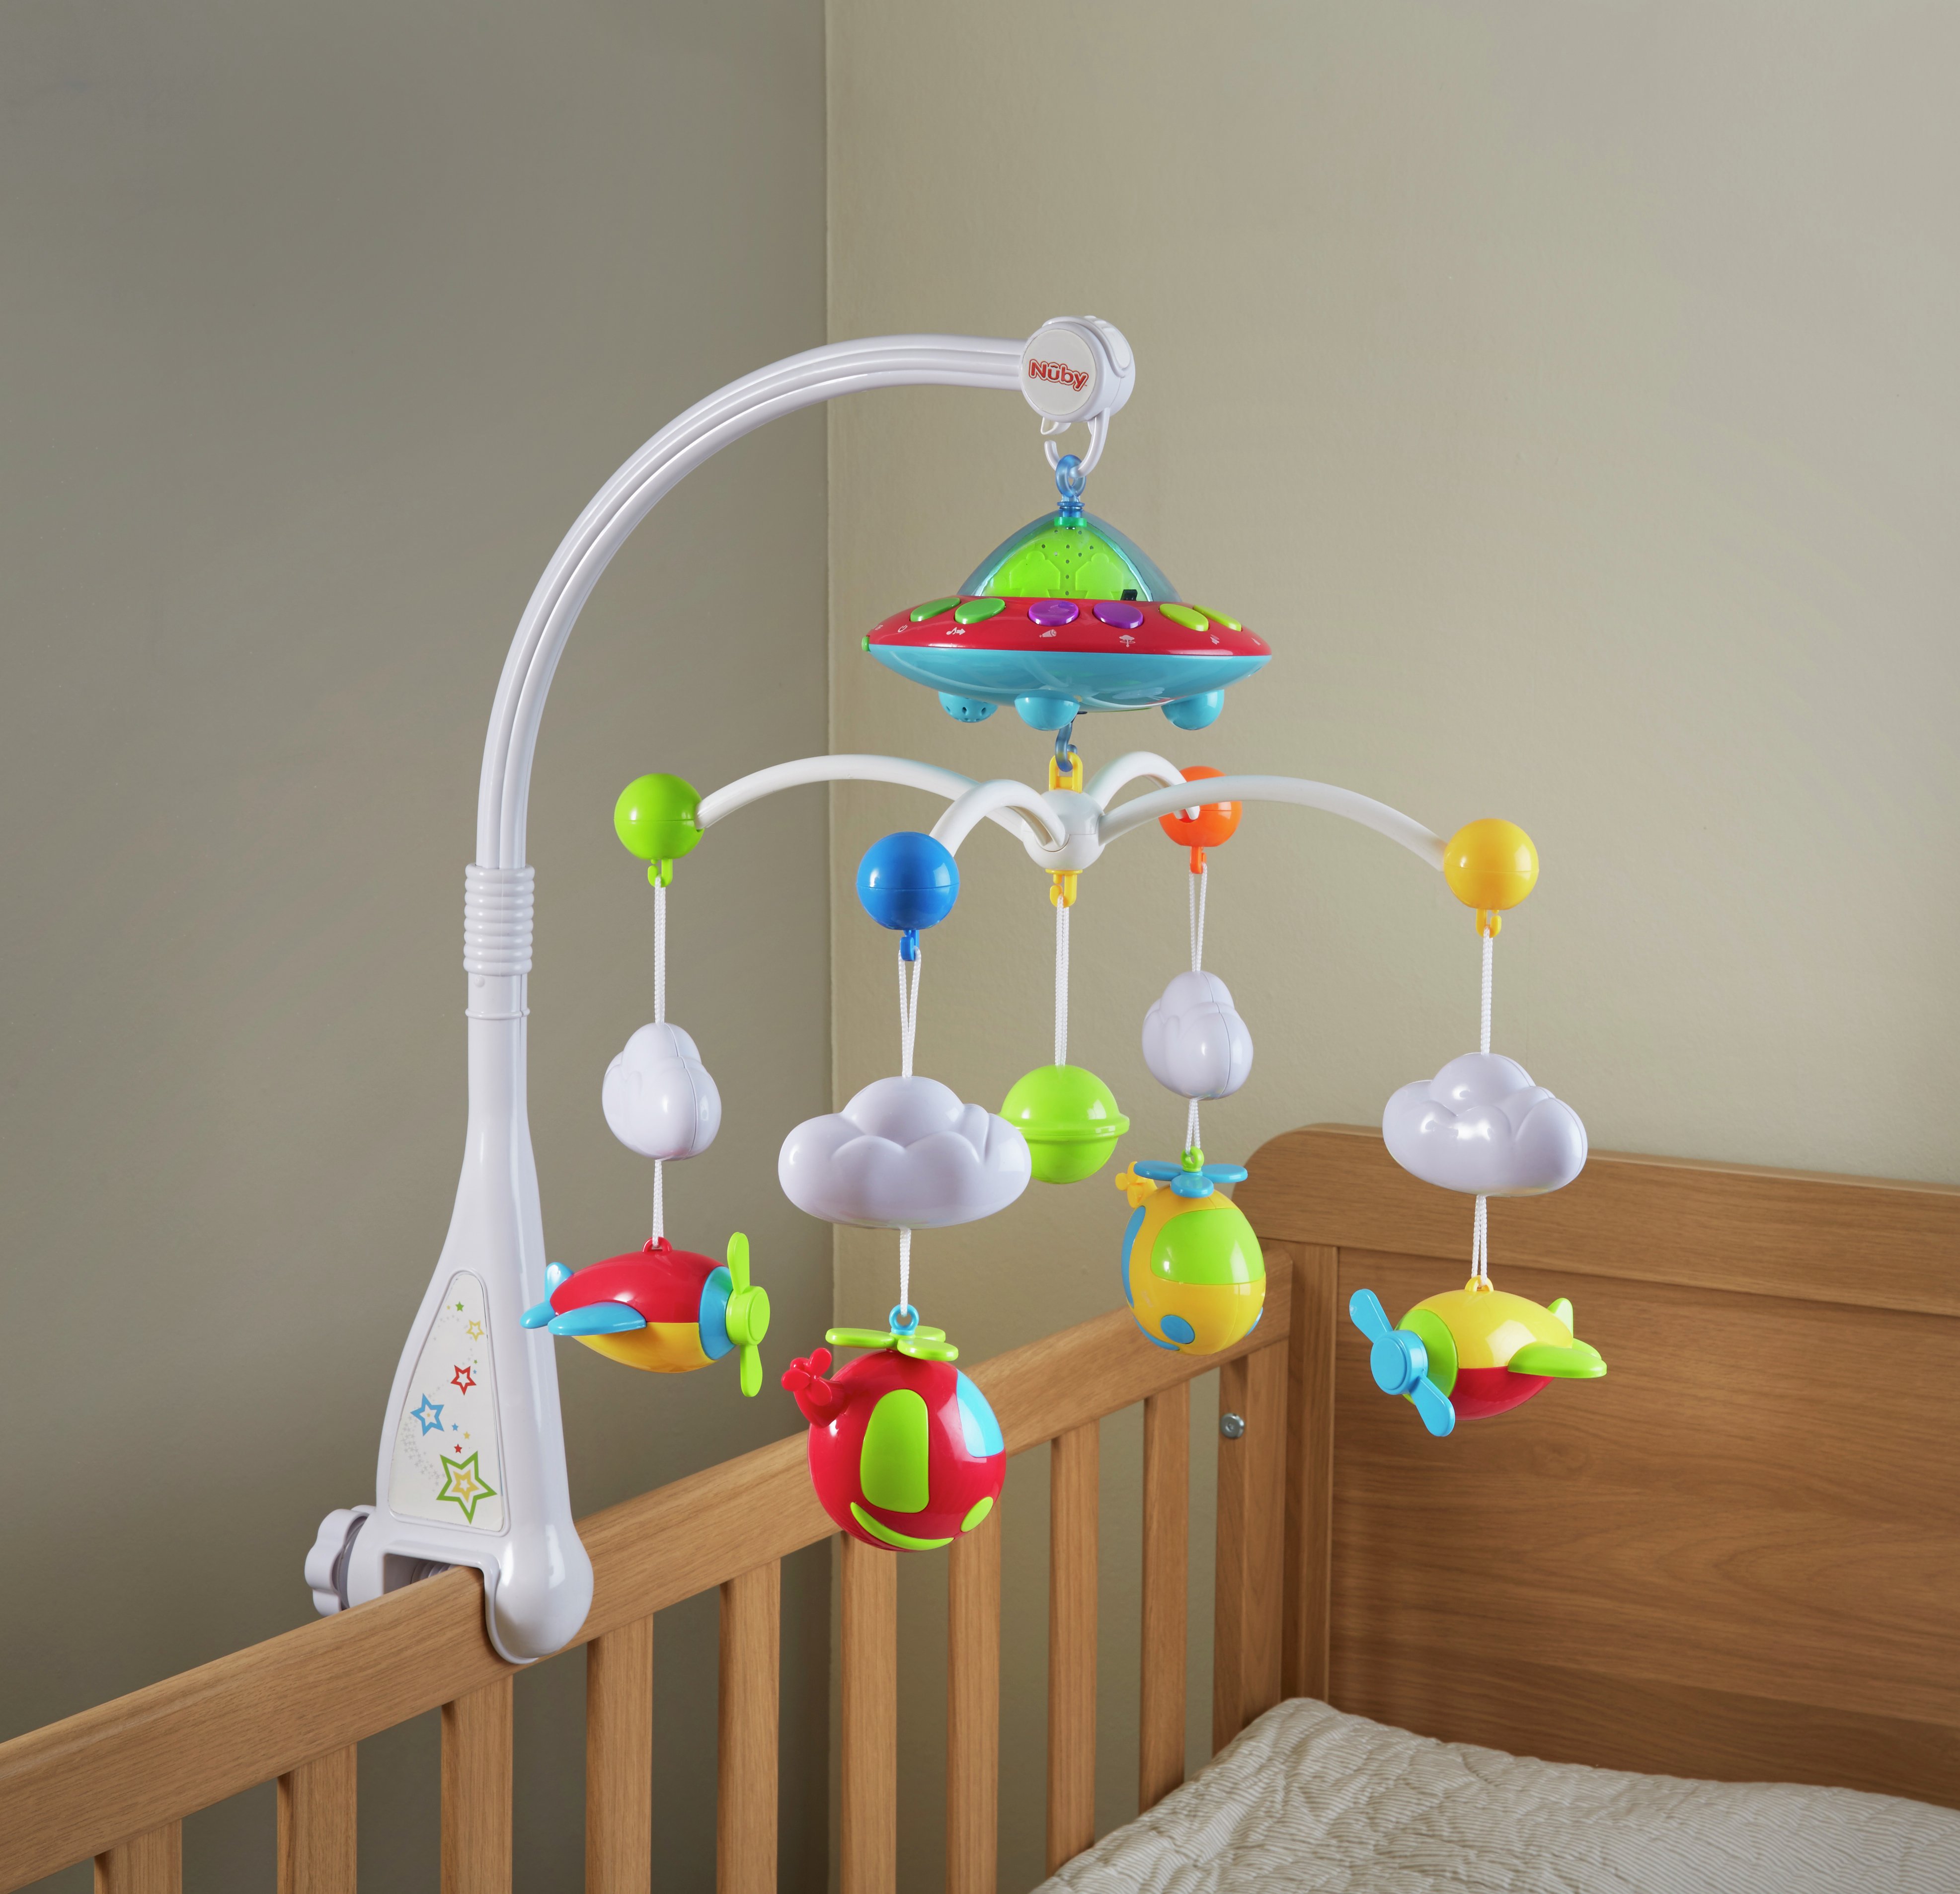 baby cot mobile